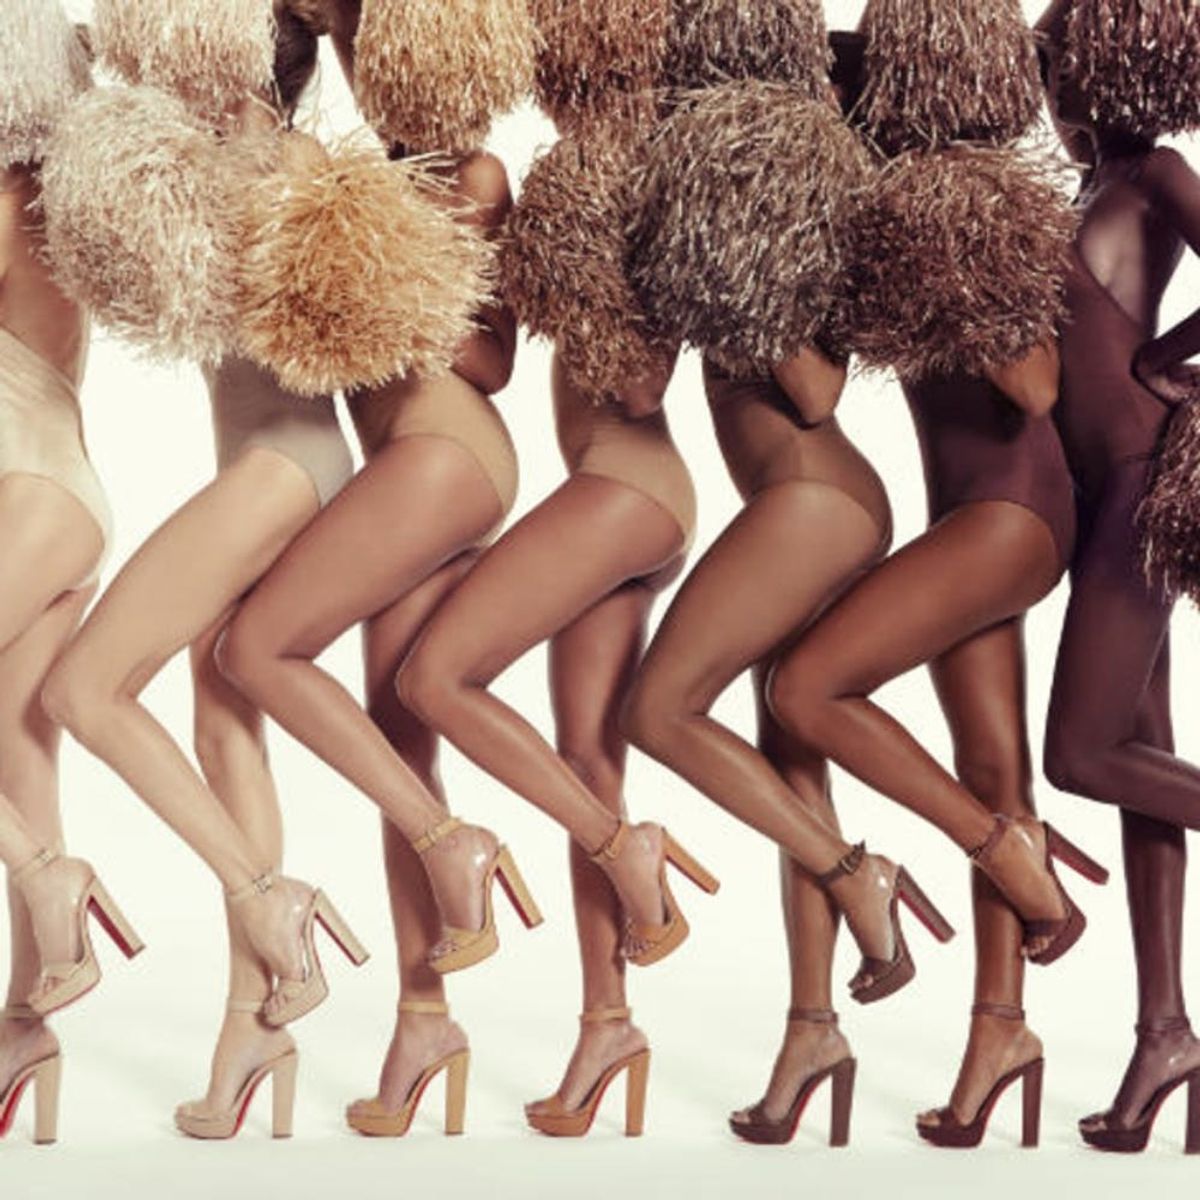 Christian Louboutin Is Expanding Its Nude Shoe Collection to Be Even More Inclusive